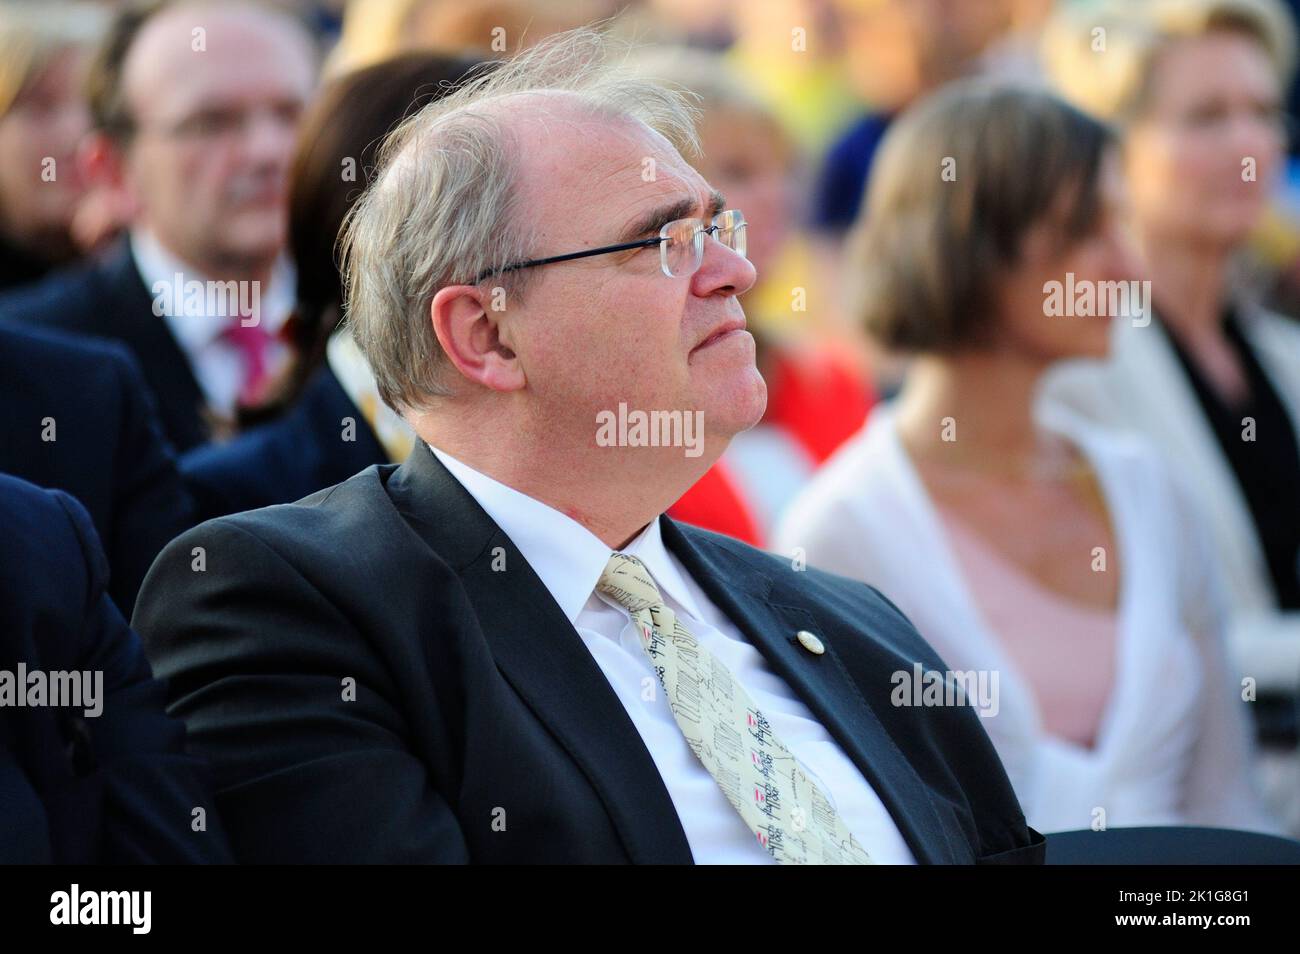 Vienna, Austria. 08 May 2015. Wolfgang Brandstetter, Minister of Justice of the Austrian Federal Government from 2013 to 2017 Stock Photo